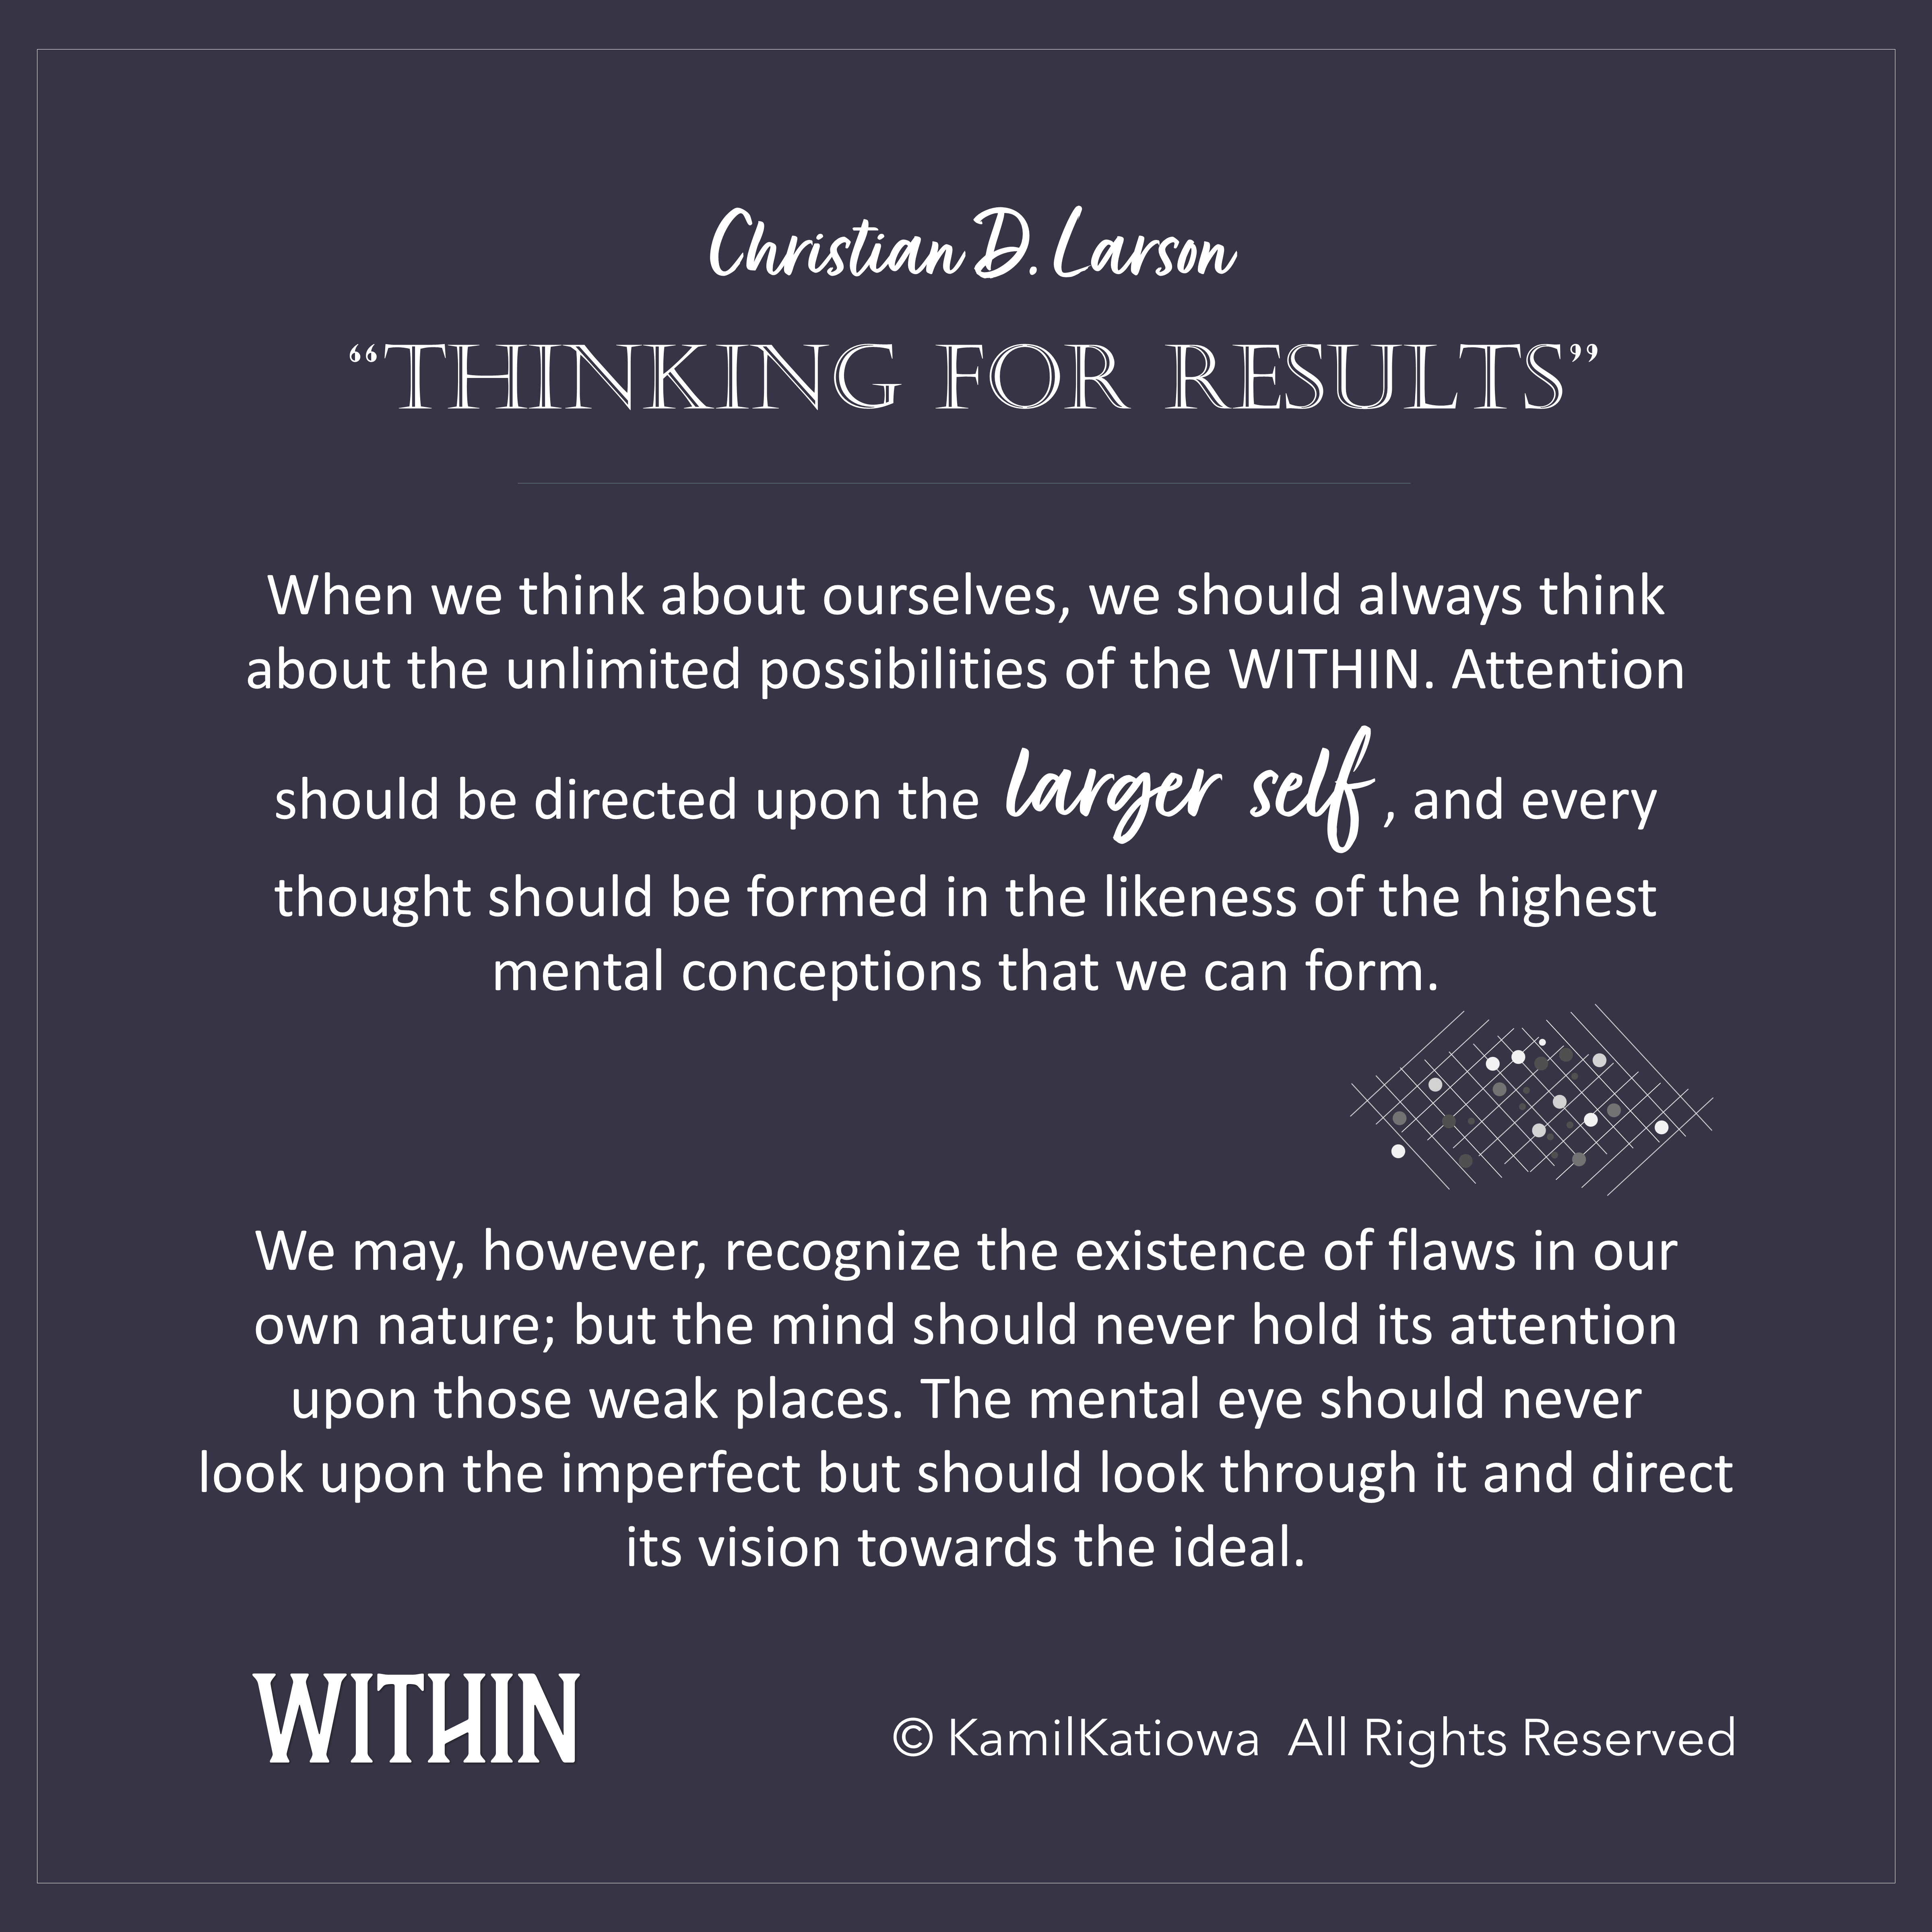 Christian D. Larson "Thinking for Results" - When we think about ourselves...